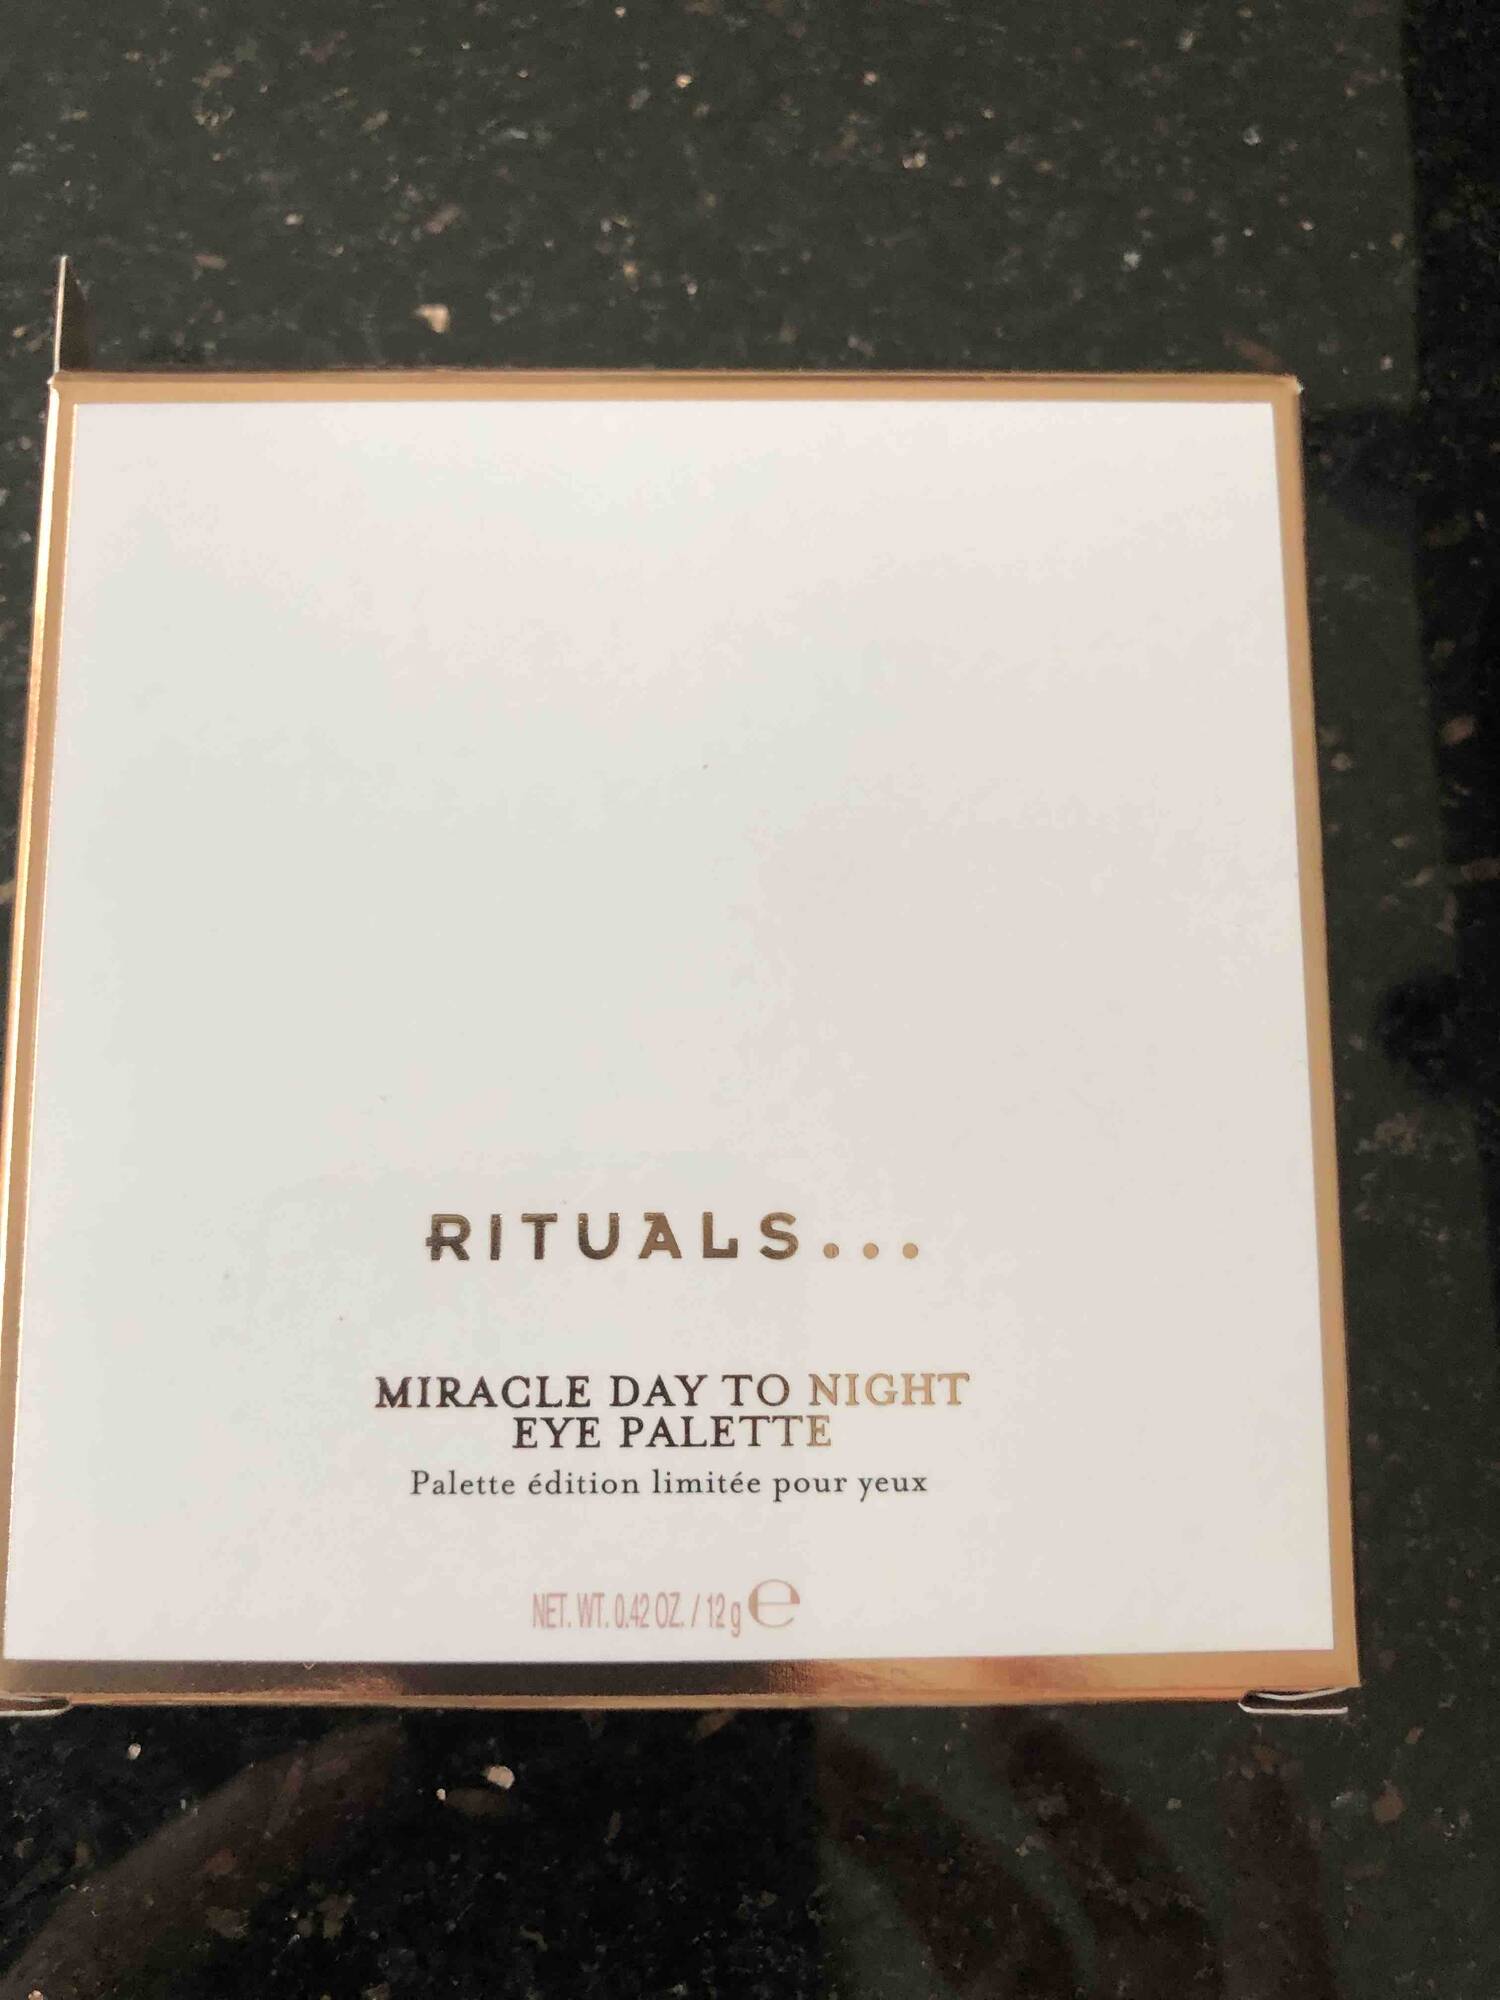 RITUALS - Miracle day to night - Eye palette